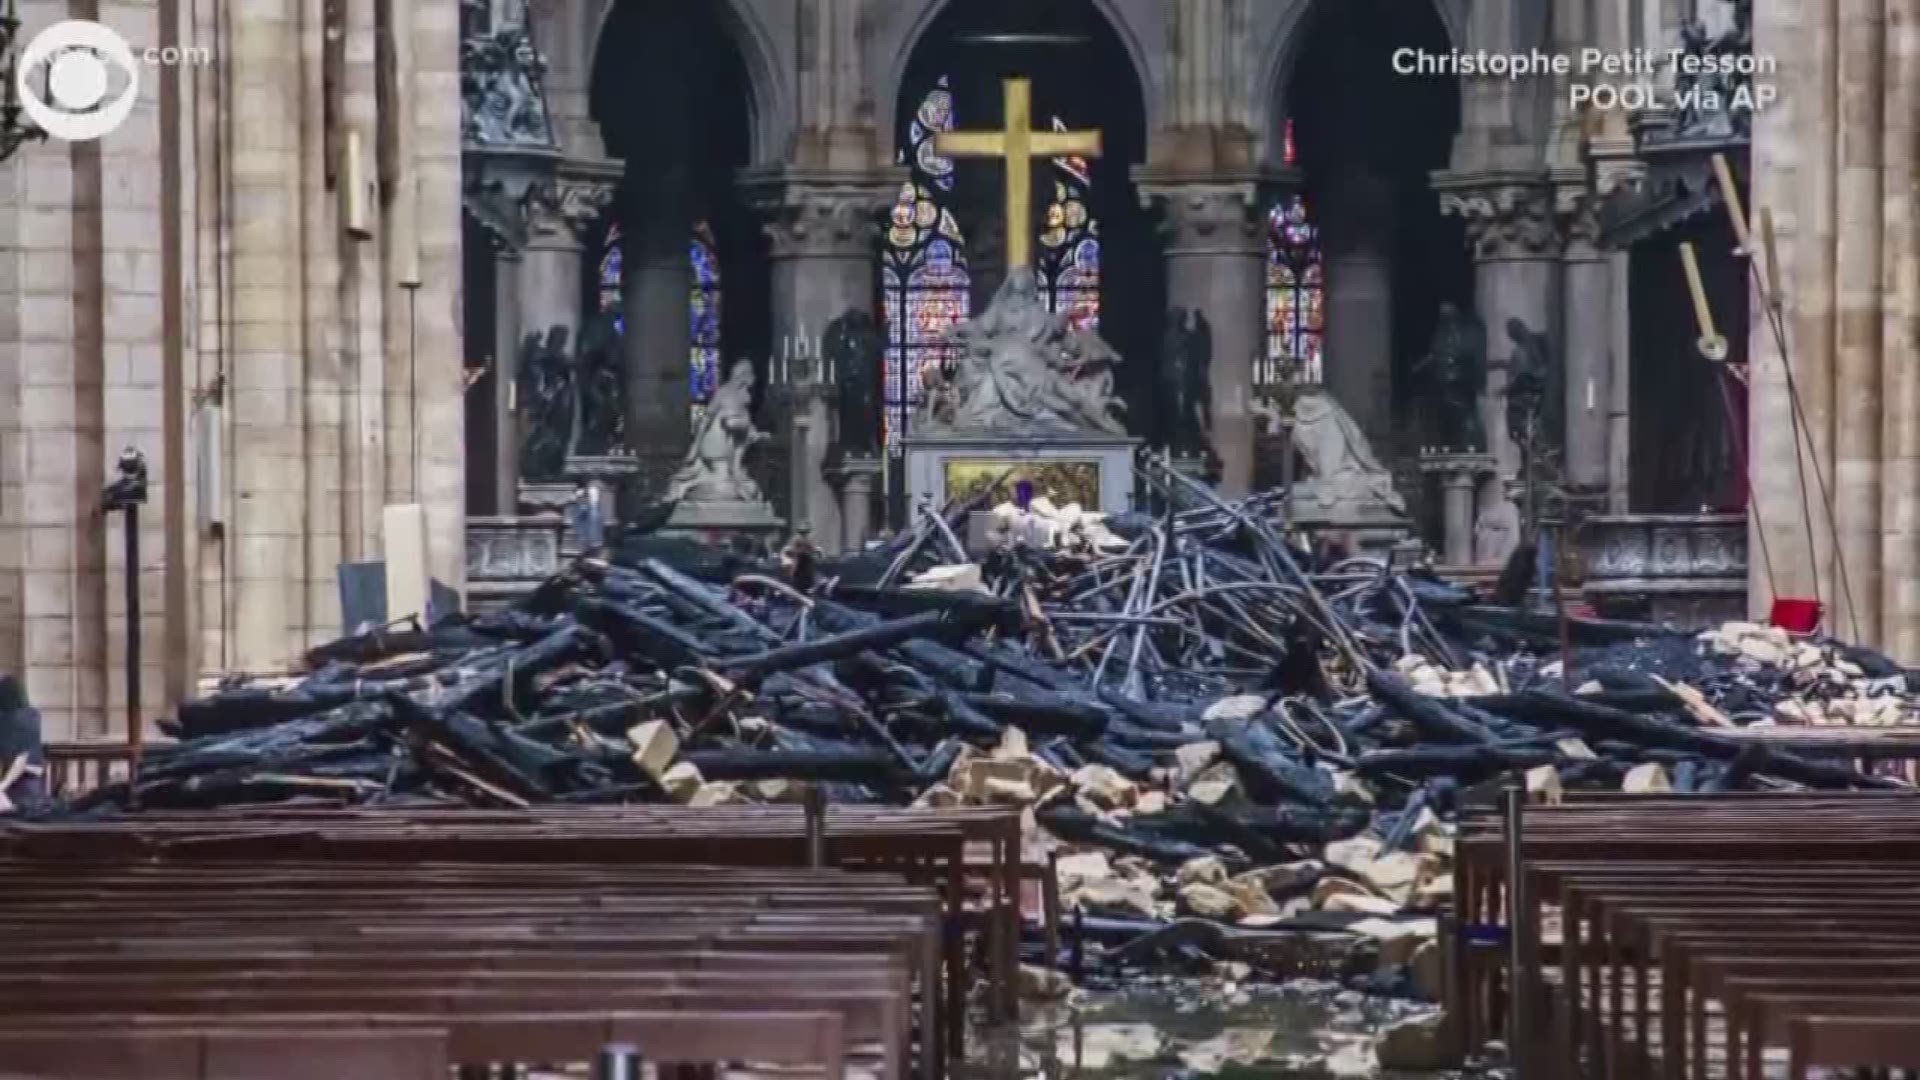 The fire is out - but a battle to rebuild the iconic landmark cathedral is underway.
French President Emmanuel Macron told the nation Notre Dame should be rebuilt within five years. 
To help us understand how difficult this will be, UTSA architecture professor William Dupont joins us.